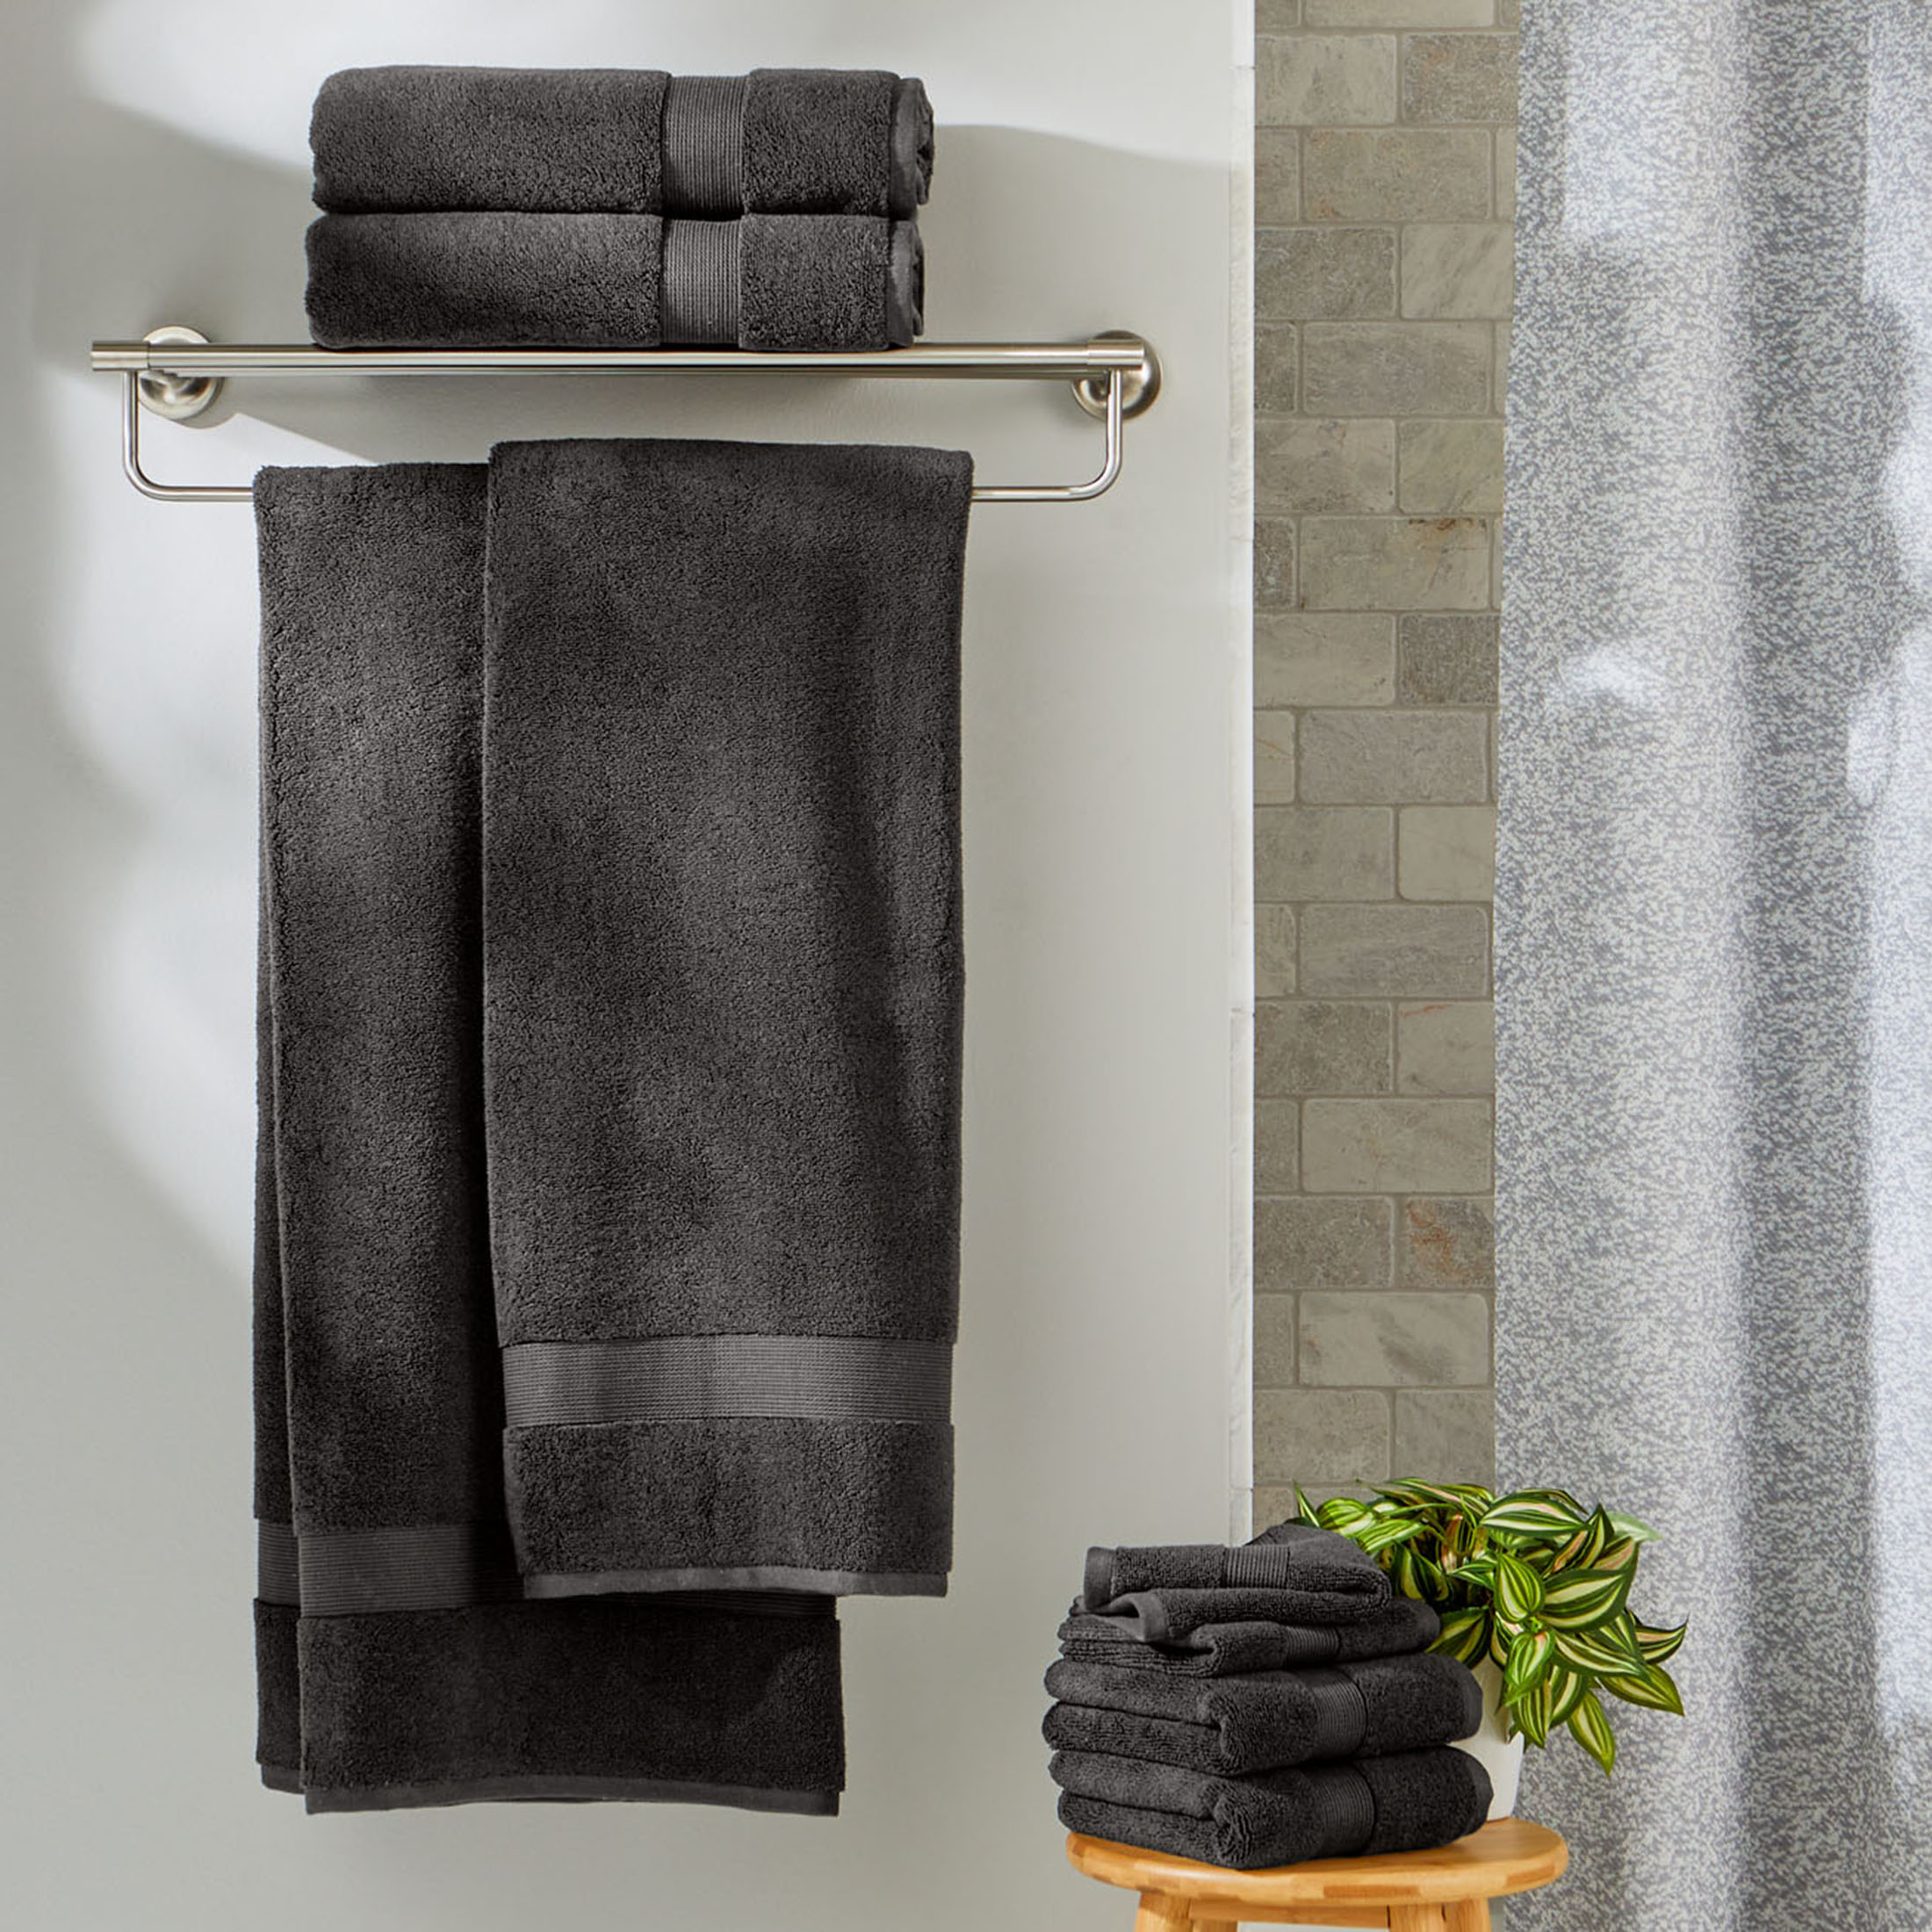 Better Homes & Gardens Signature Soft Hand Towel, Gray - image 2 of 6